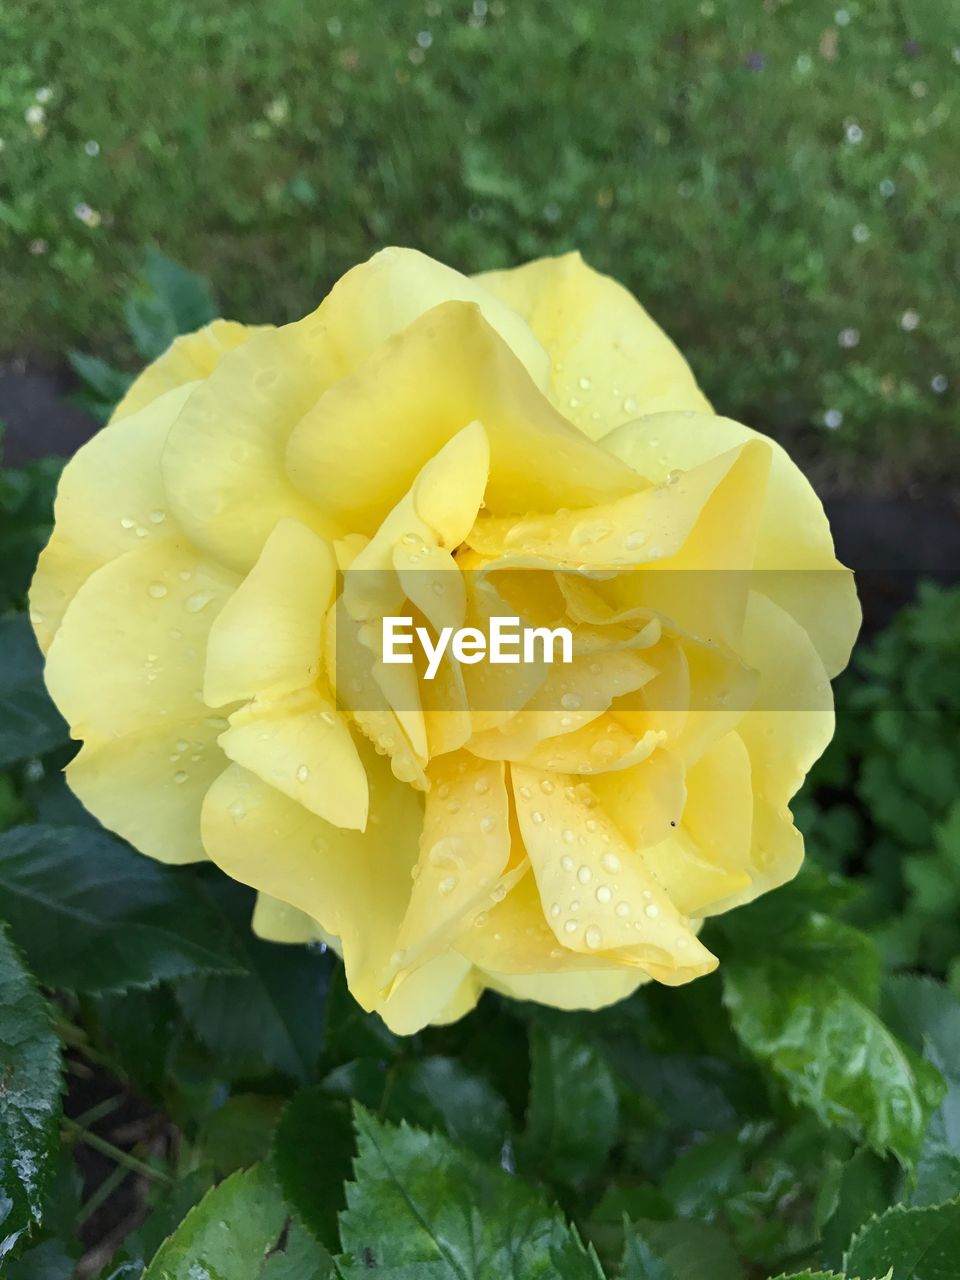 CLOSE-UP OF WET YELLOW ROSES BLOOMING OUTDOORS